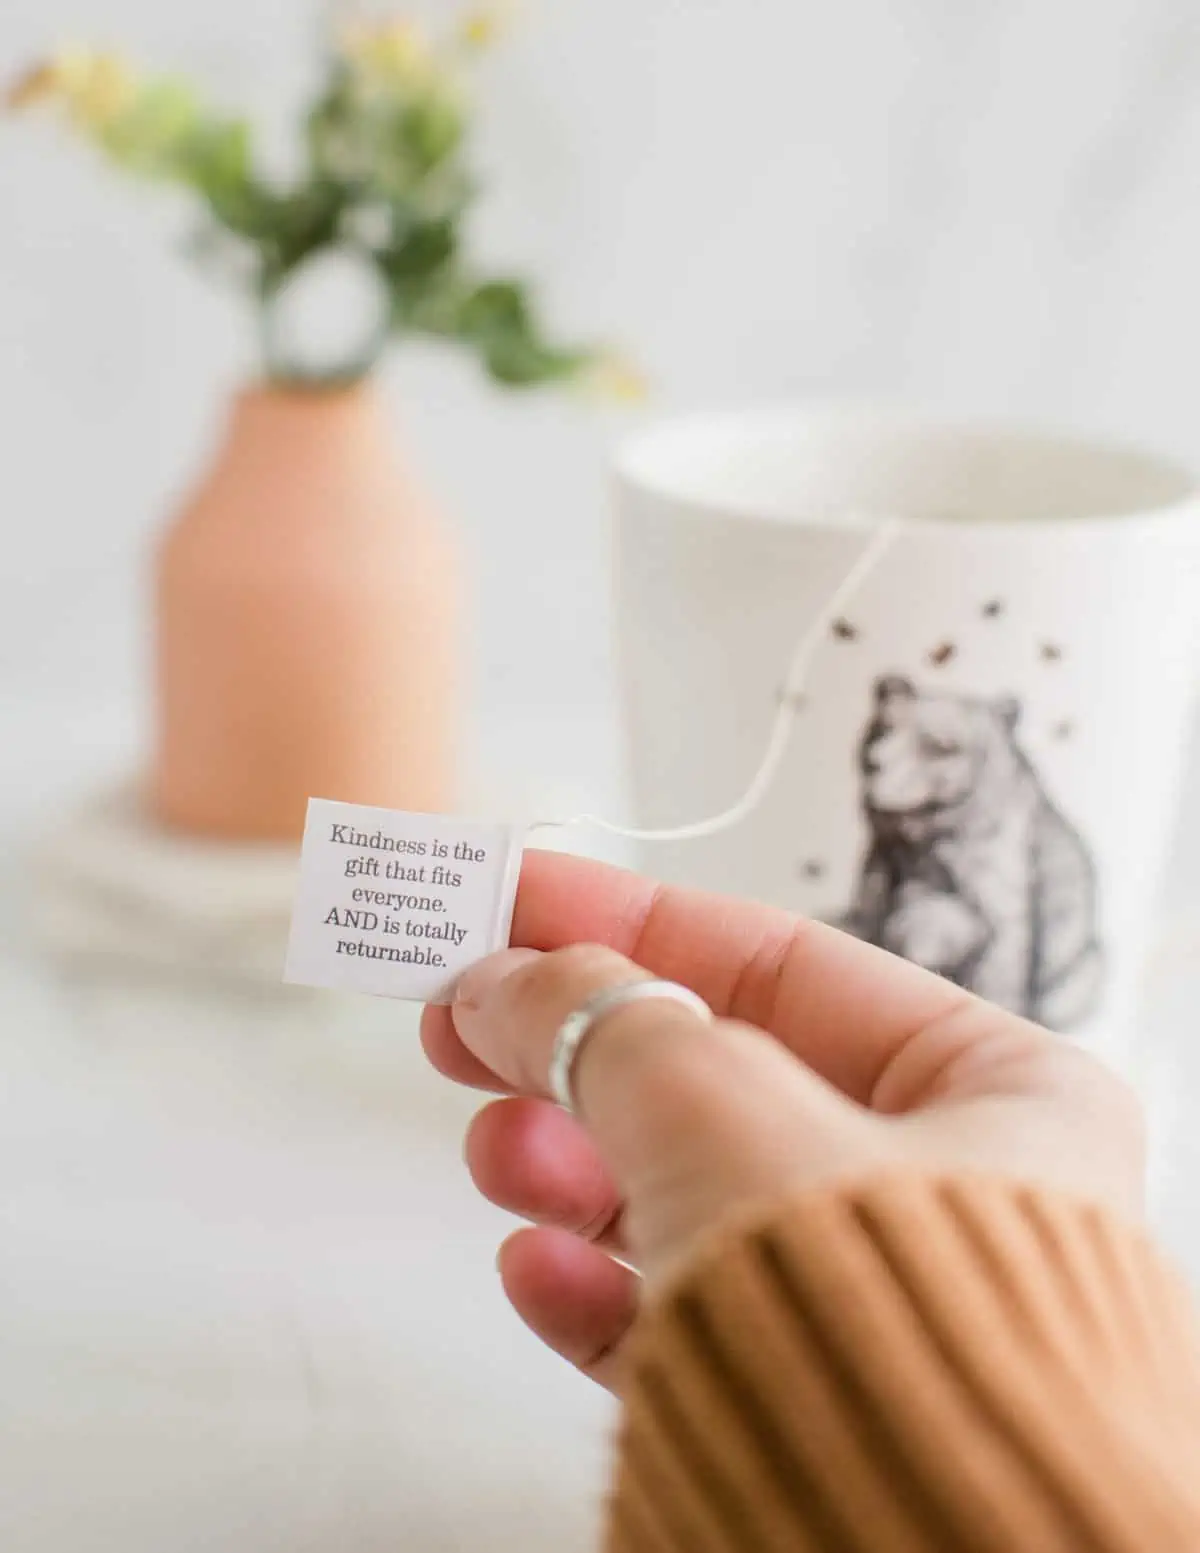 Holding up an Earth Mama vegan tea tag that has an inspiring message about kindness. 